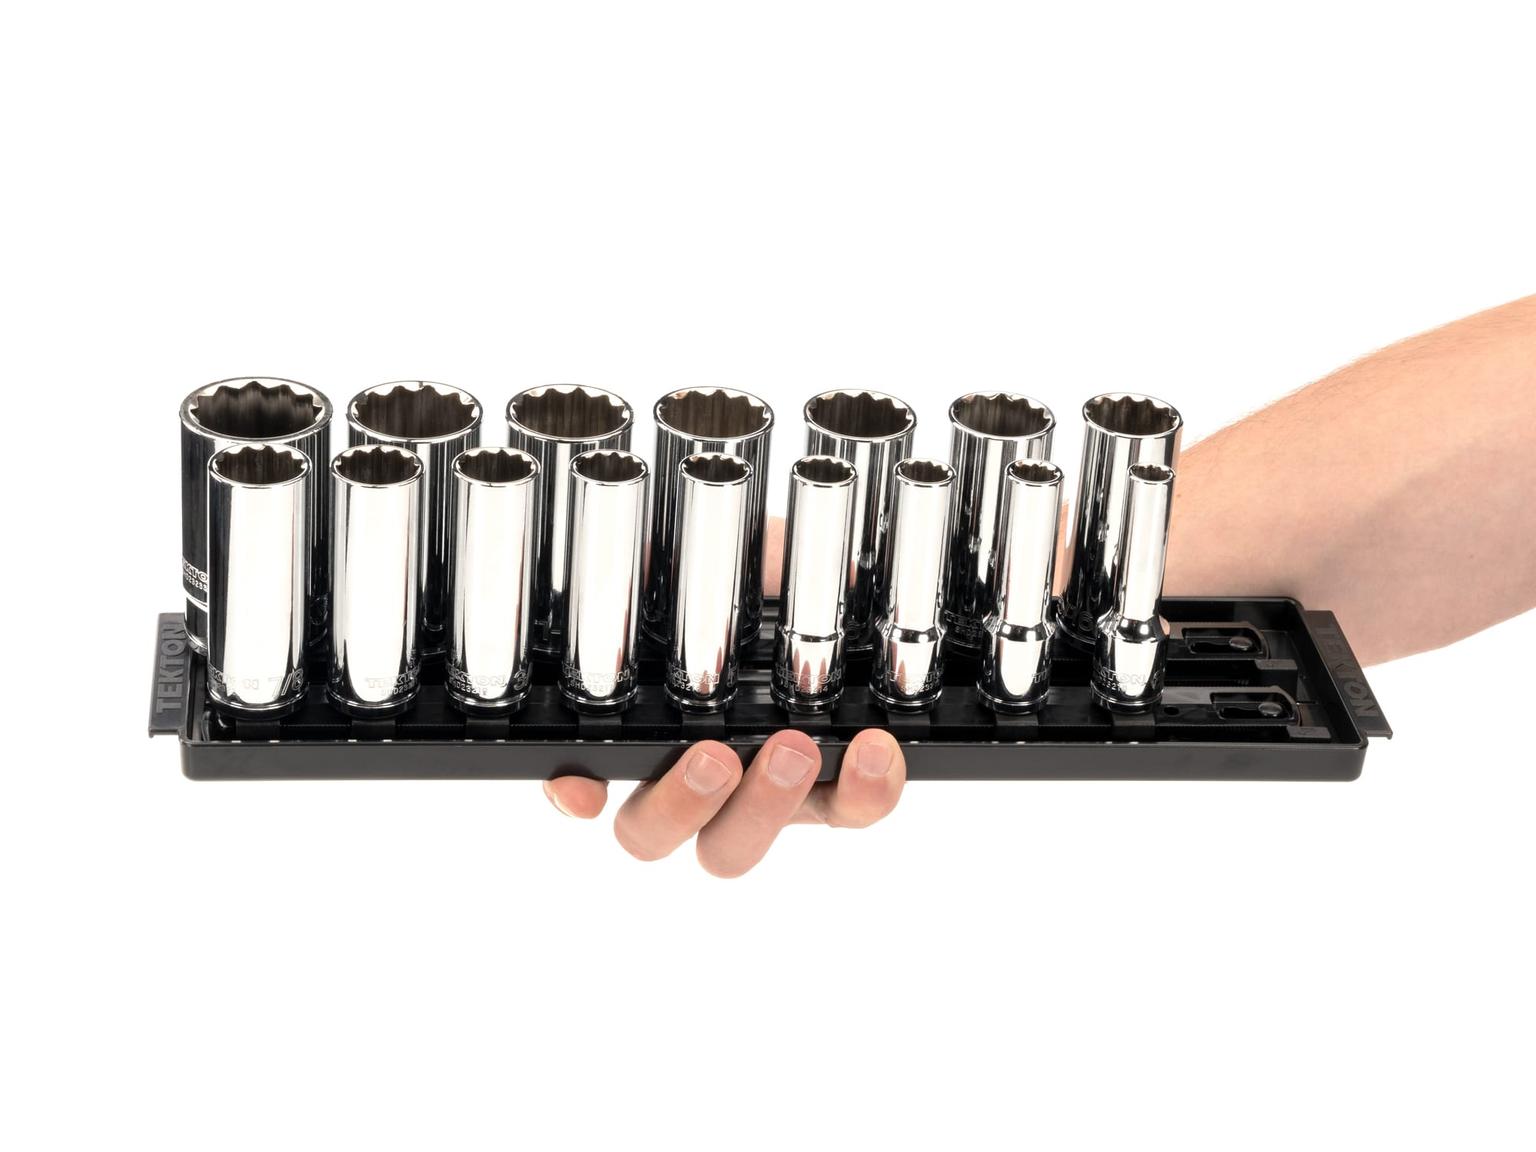 TEKTON SHD92206-T 1/2 Inch Drive 12-Point Socket Set with Rails, 32-Piece (3/8-1-5/16 in.)